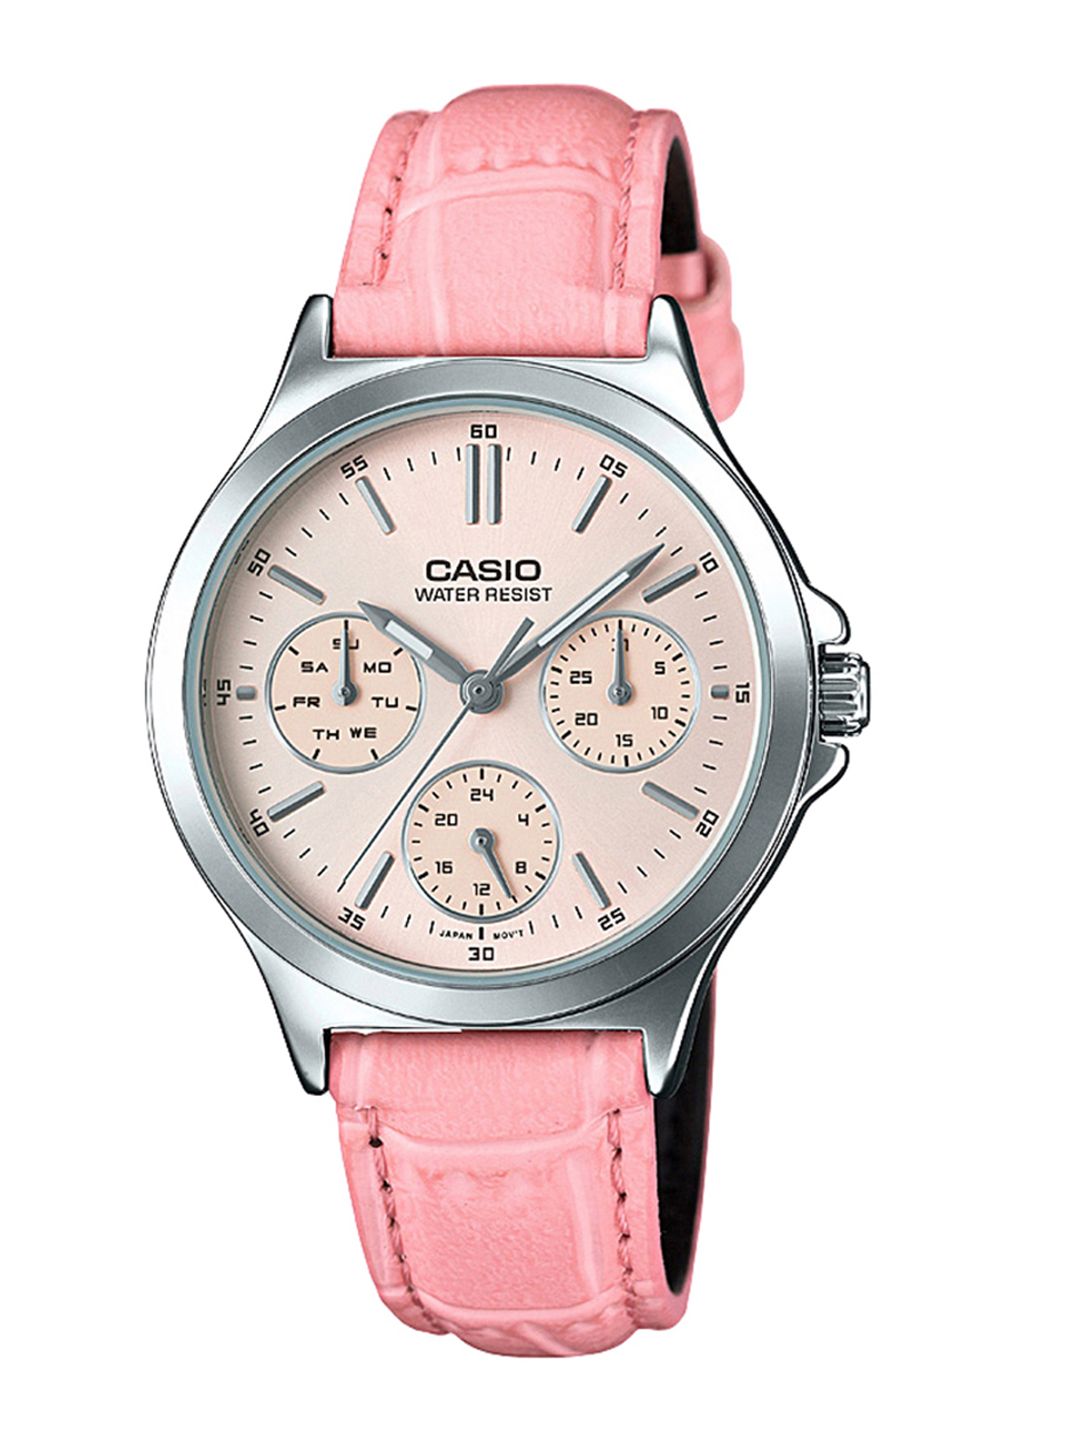 CASIO Enticer Women Pink Analogue Watch A1150 LTP-V300L-4AUDF Price in India